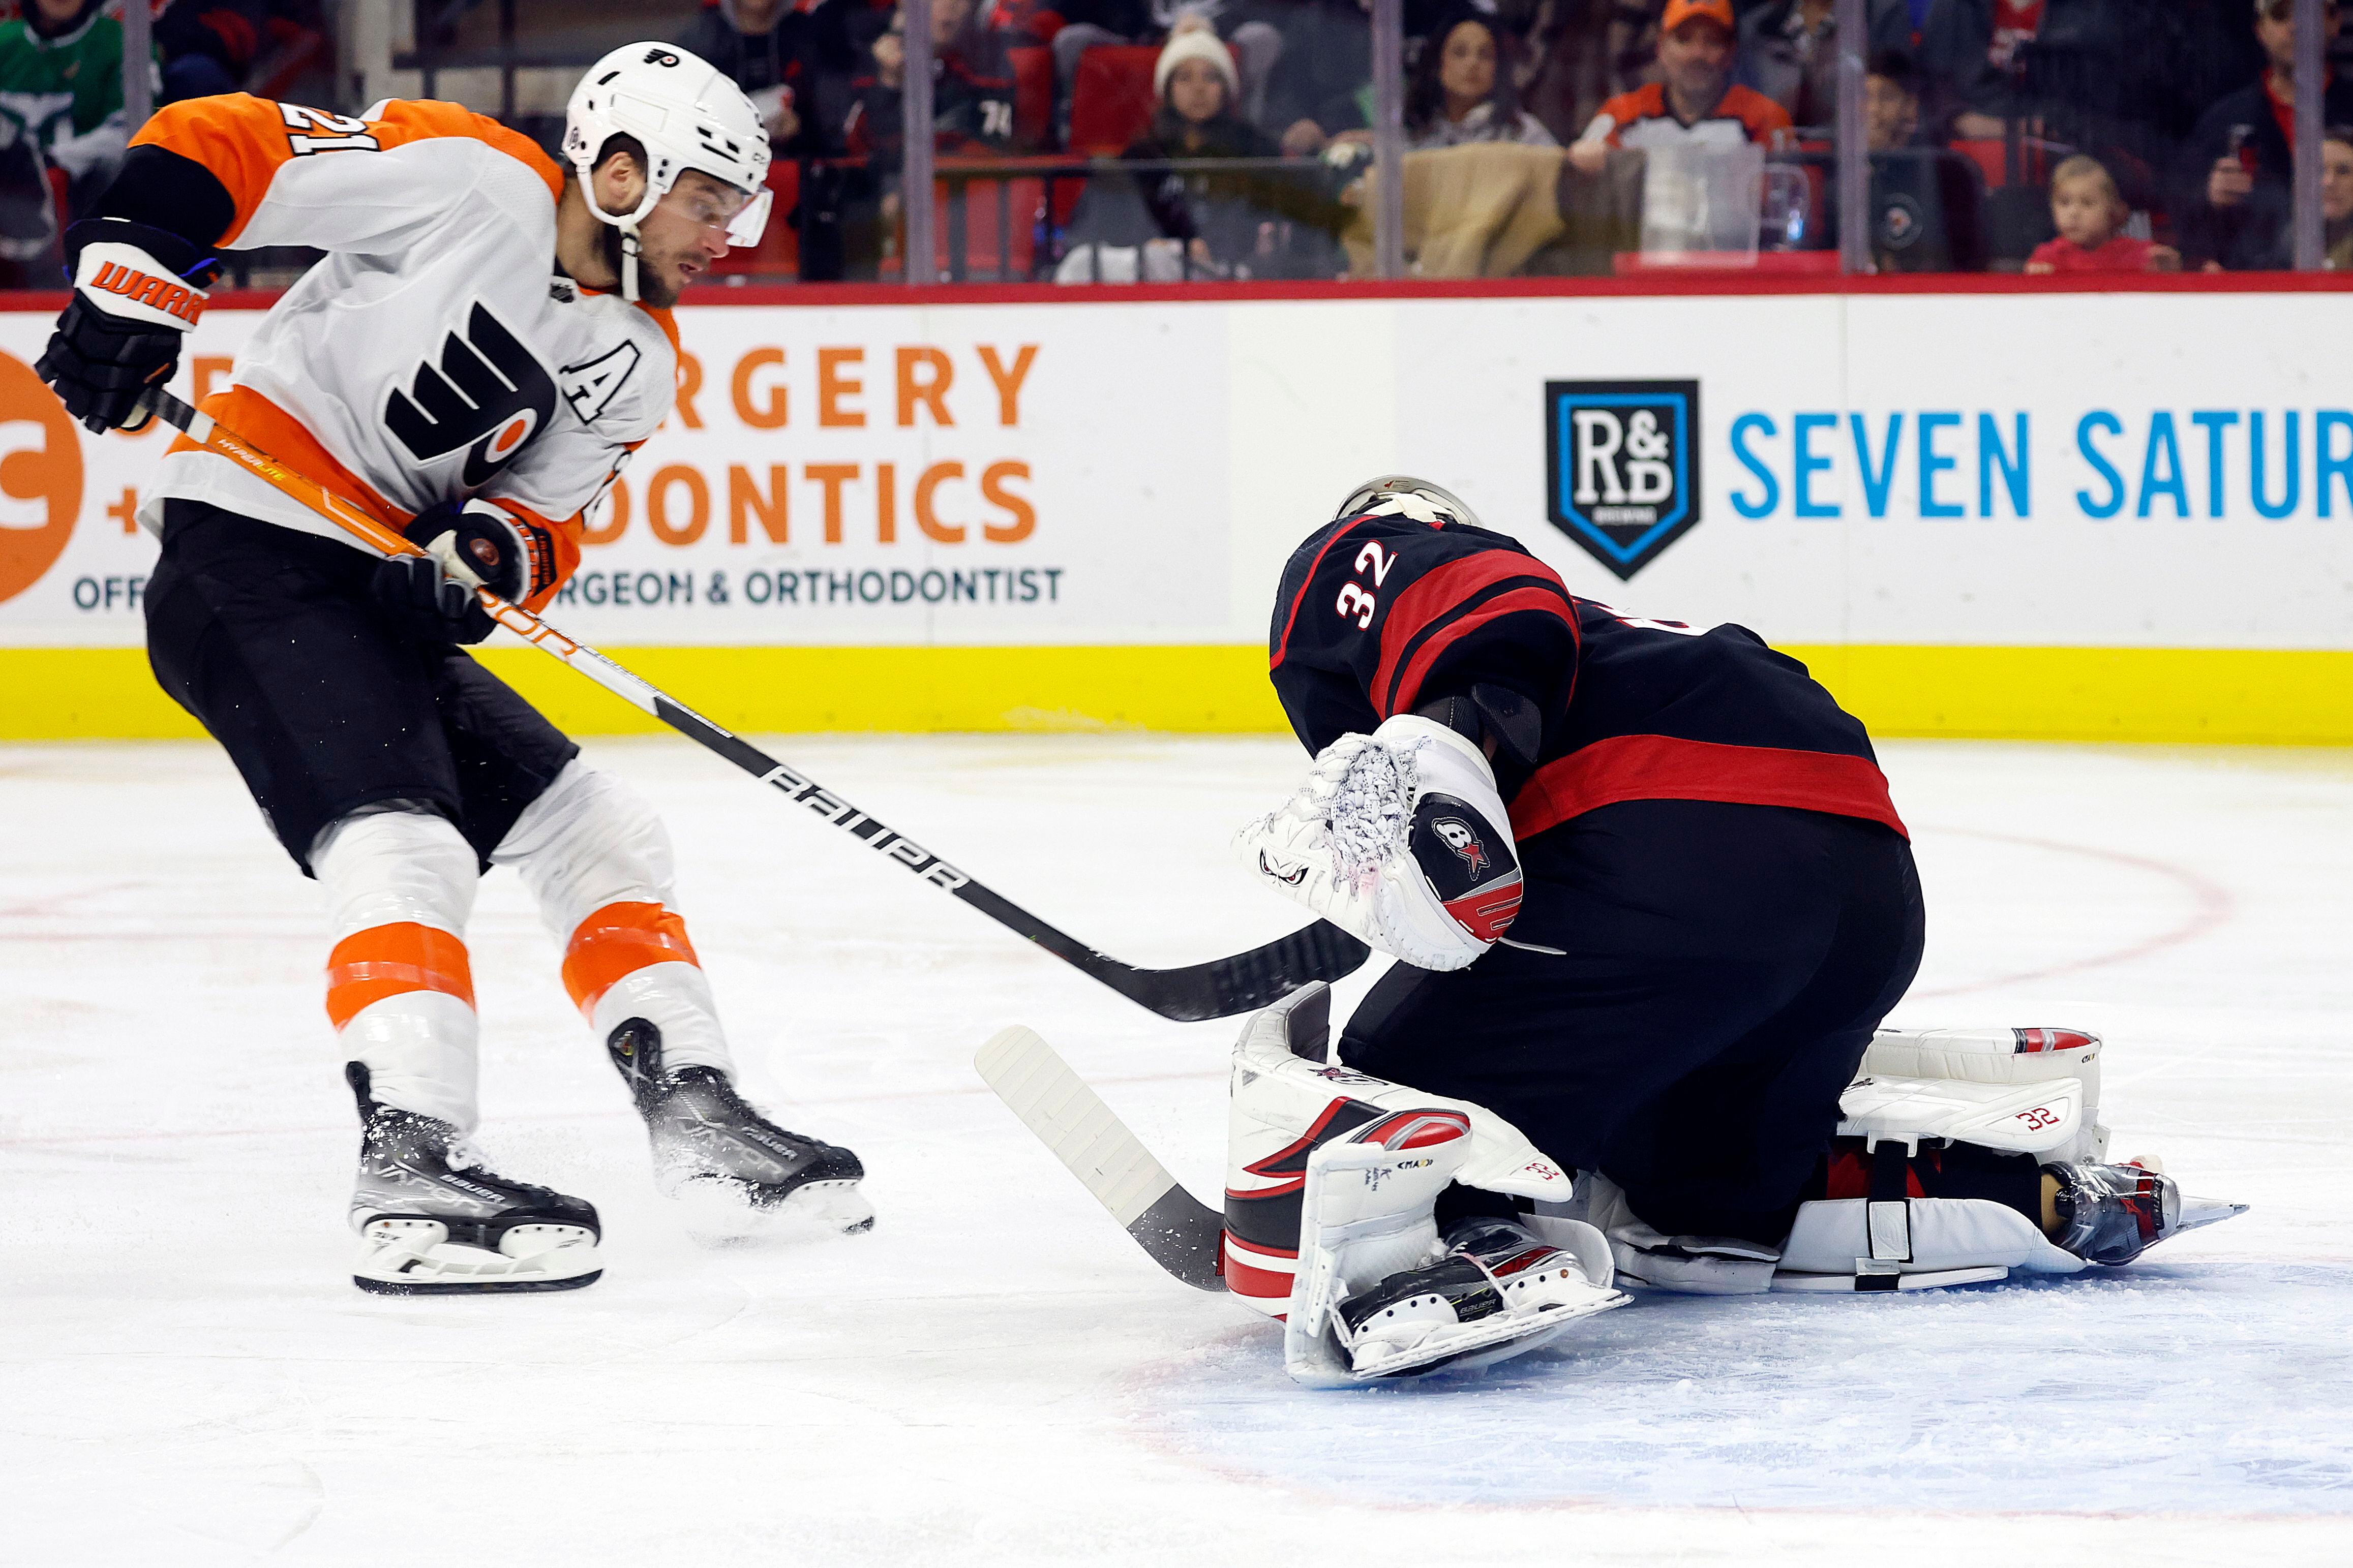 Laughton goal finally ends Flyers' winter nightmare – Delco Times